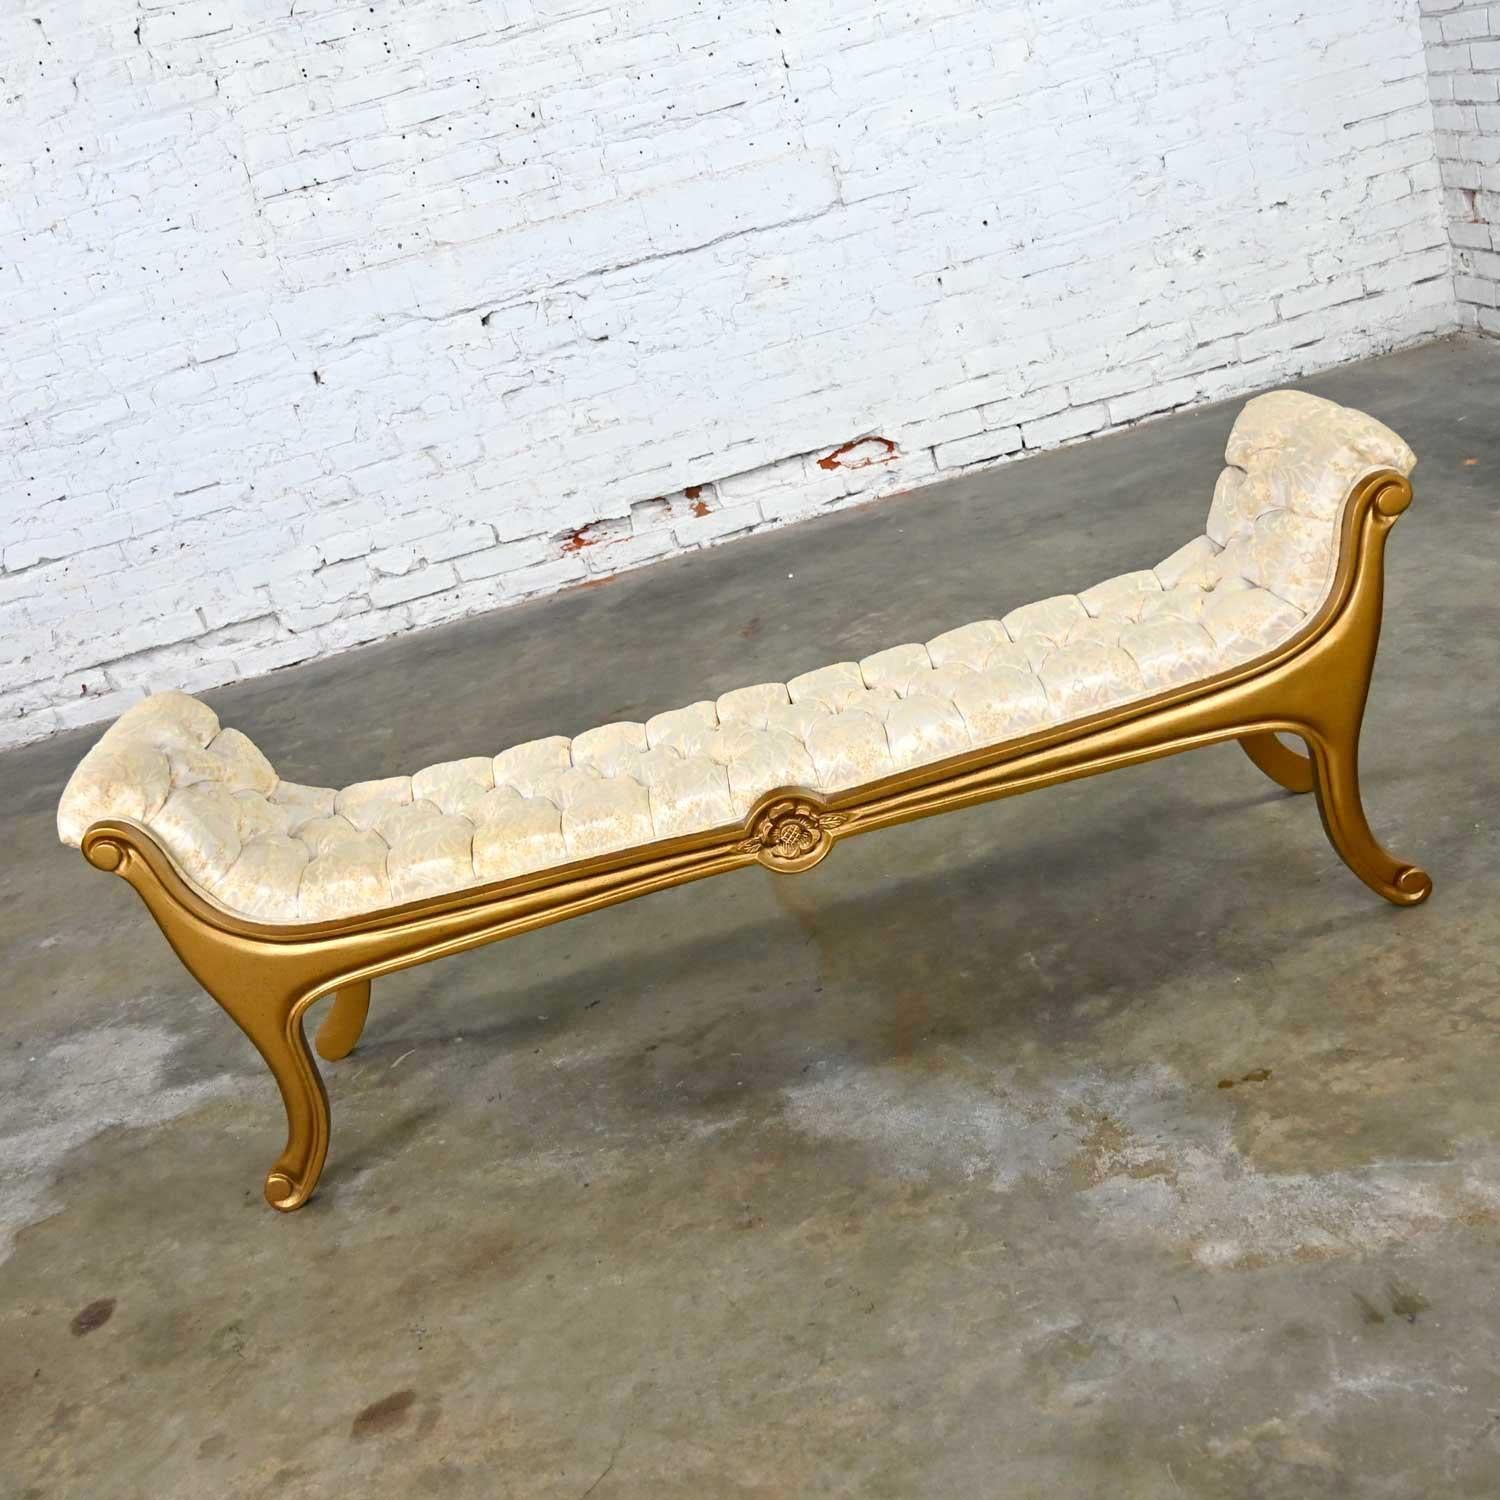 American Hollywood Regency Upholstered Gilded Gondola Bench Attributed to Prince Howard